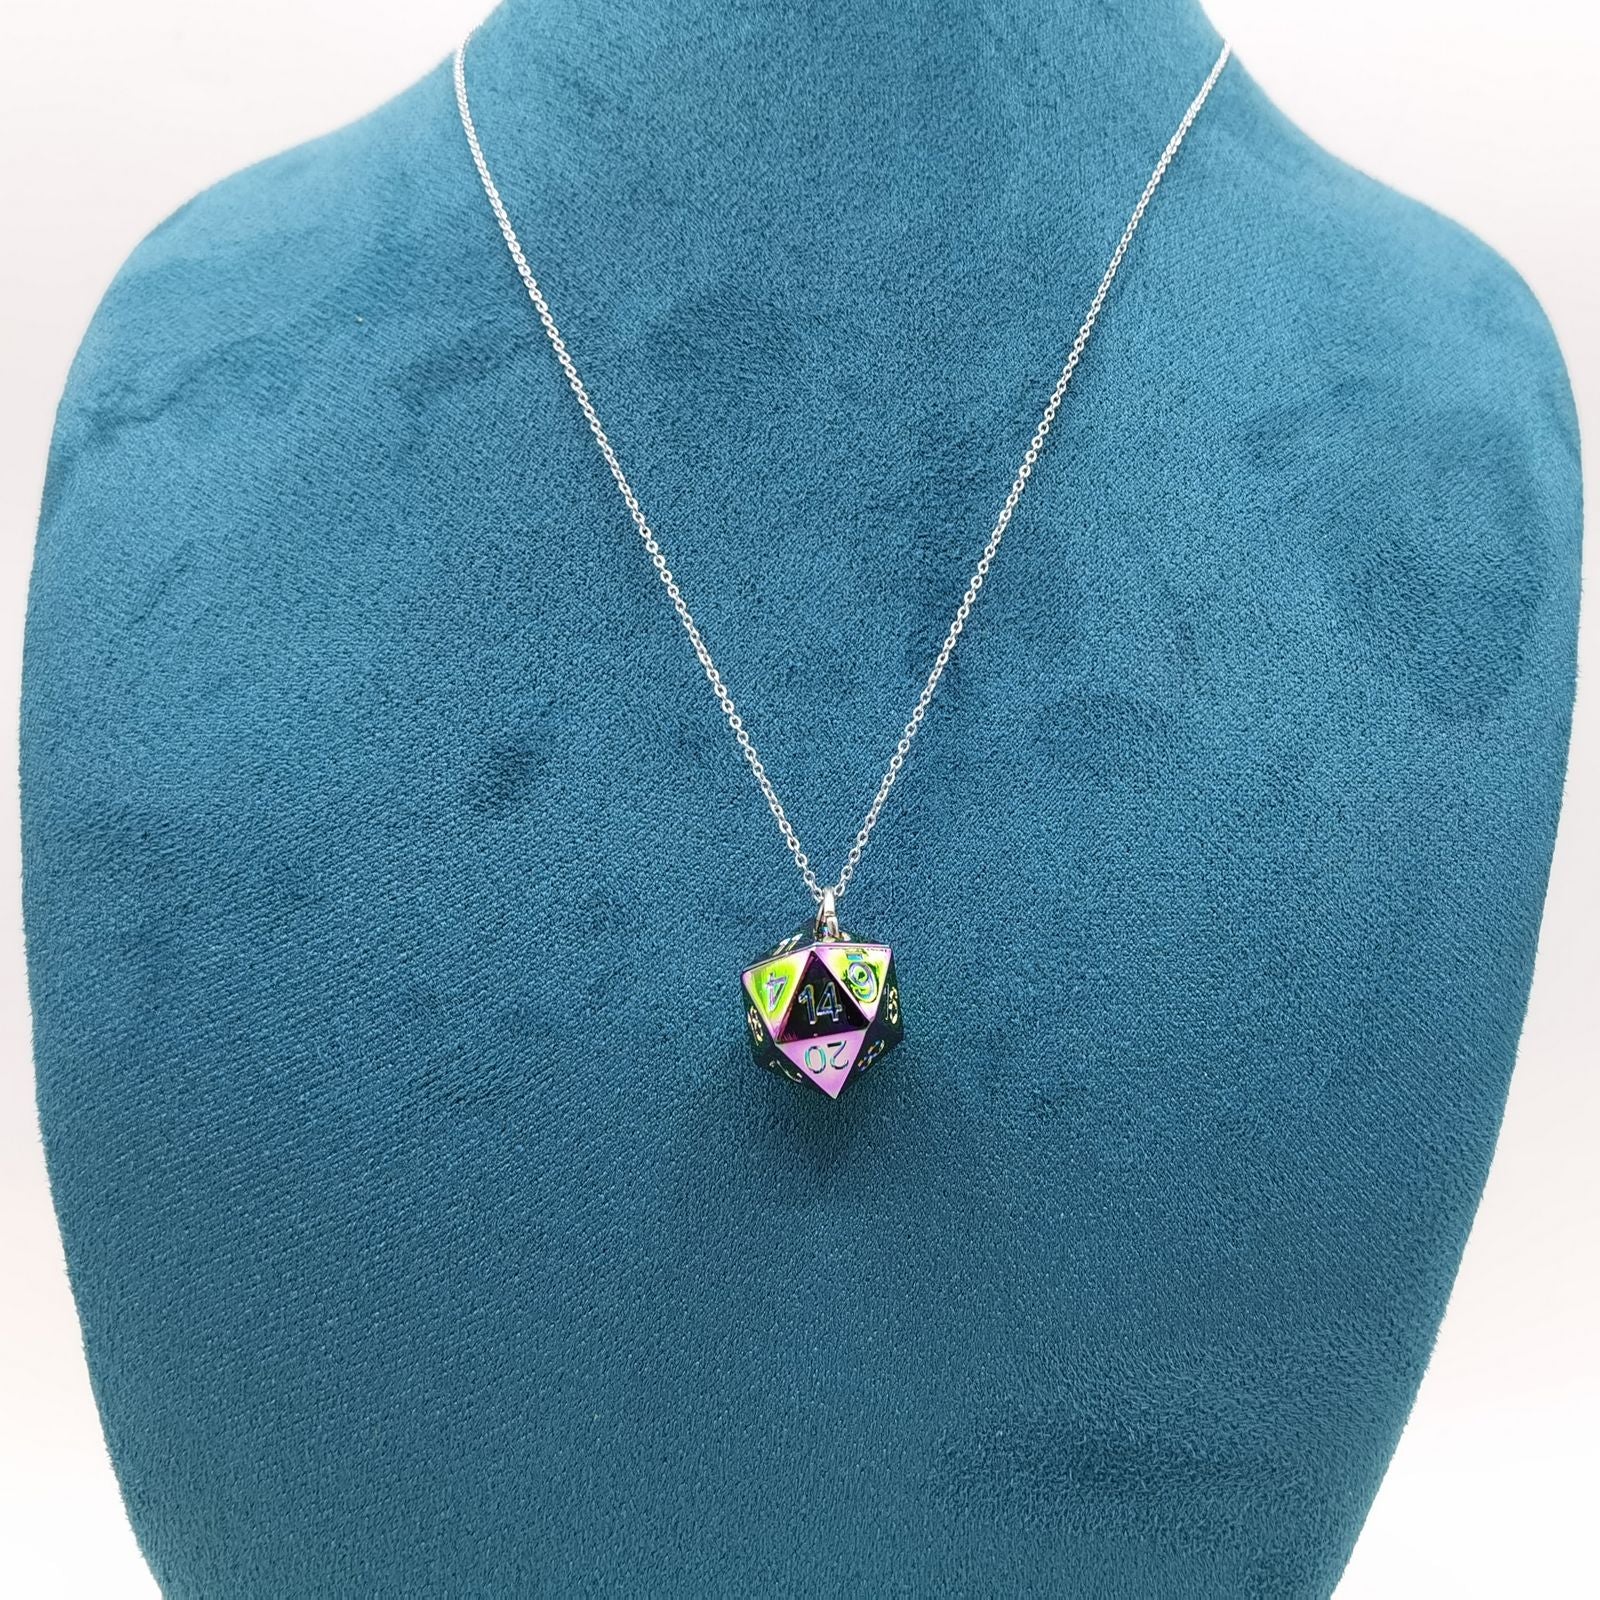 Prism Rainbow D20 dice necklace pendant with chain for D&D gamer – HYMGHO  Dice